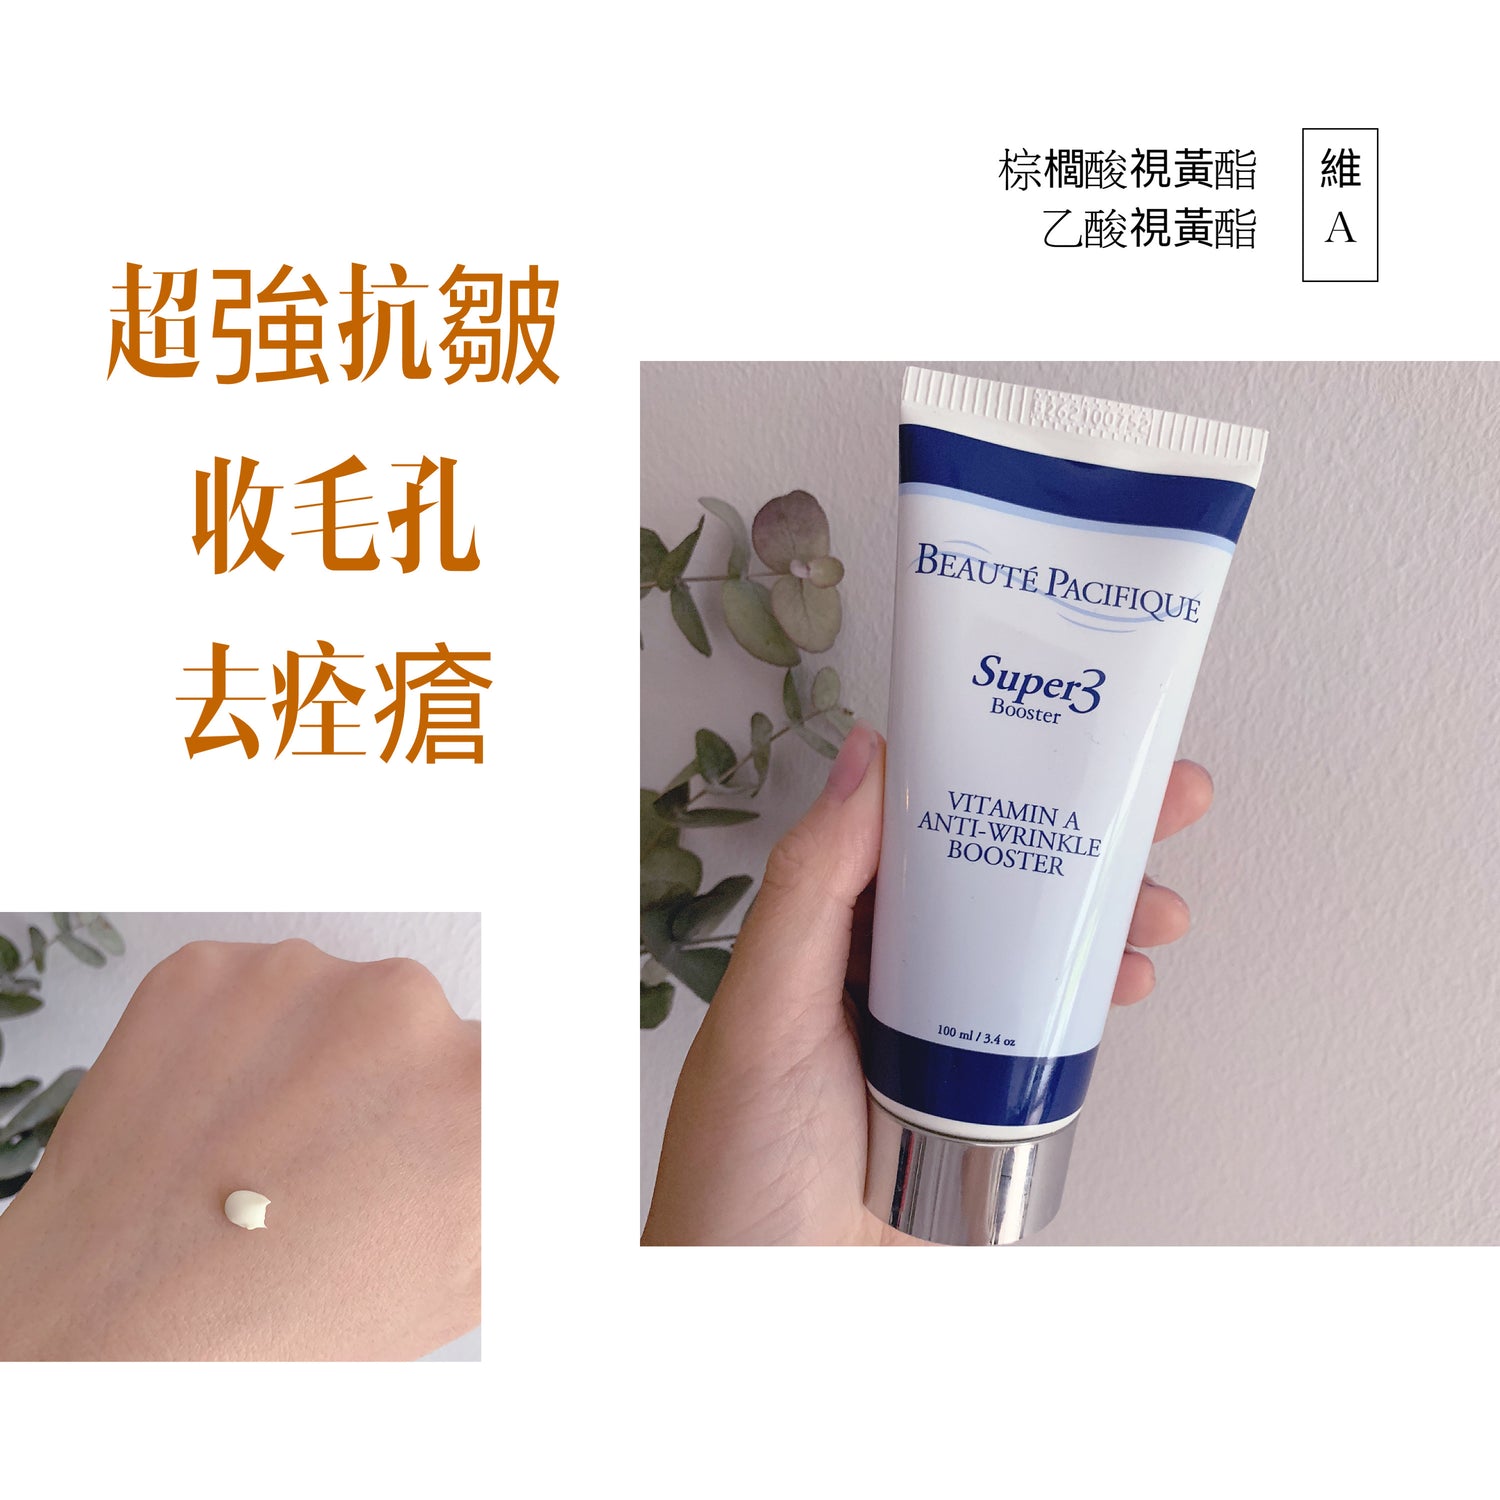 Beaute pacifique Super 3 booster vitamin A anti-wrinkle booster 50ml - buy European skincare in Hong Kong - 1click2beauty